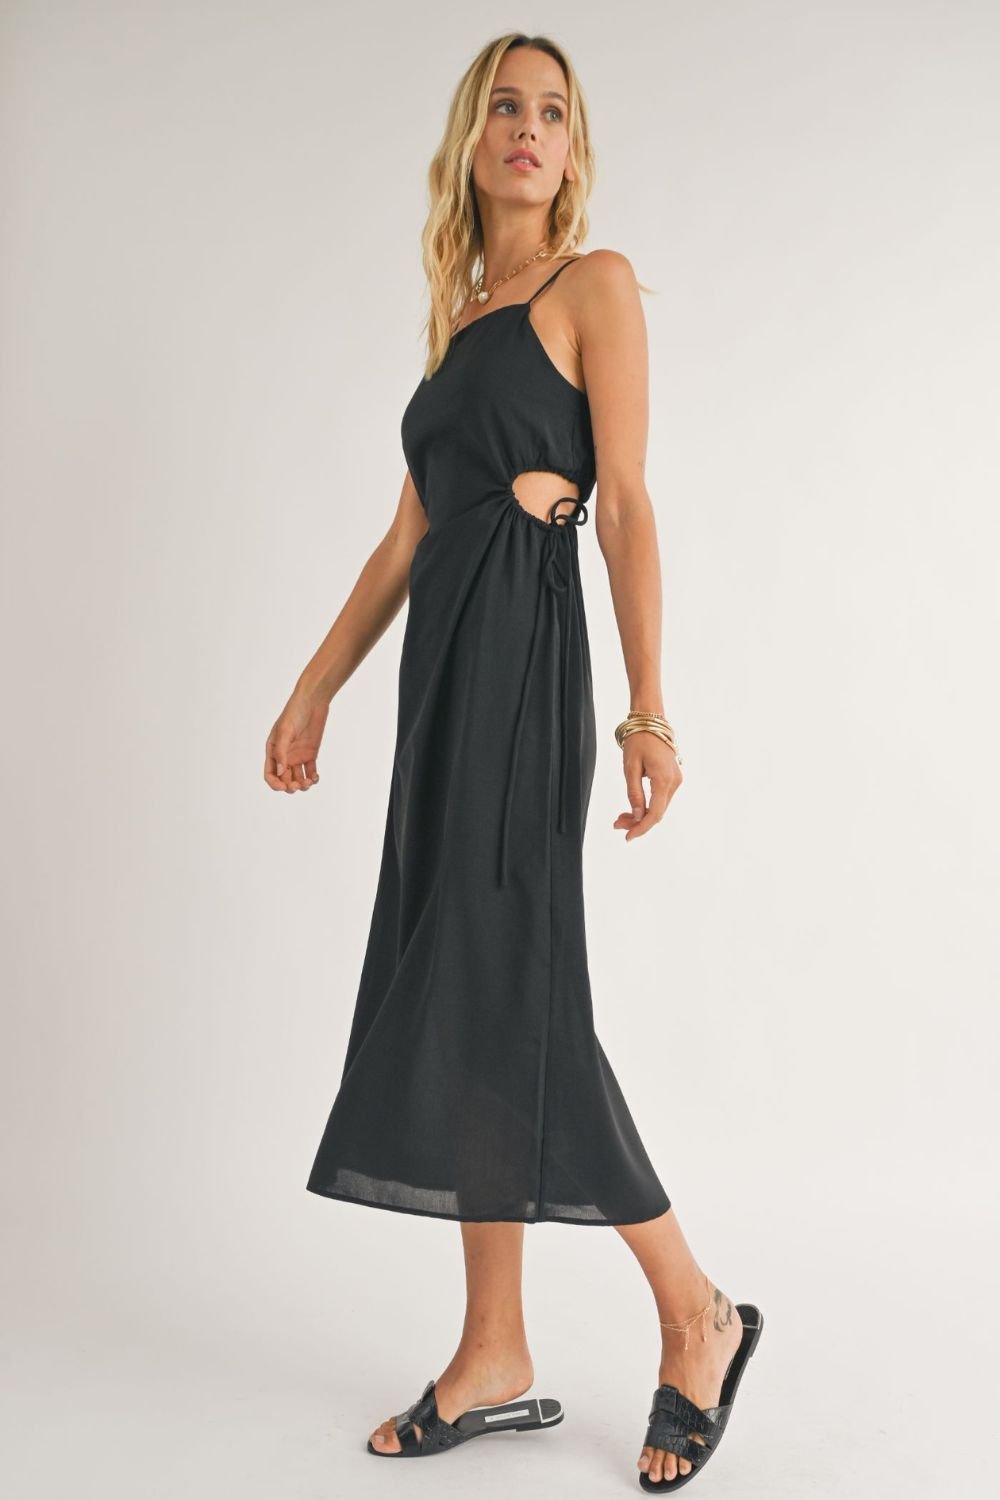 Women's Side Cut Out Summer Midi Dress | Black - Women's Dresses - Blooming Daily